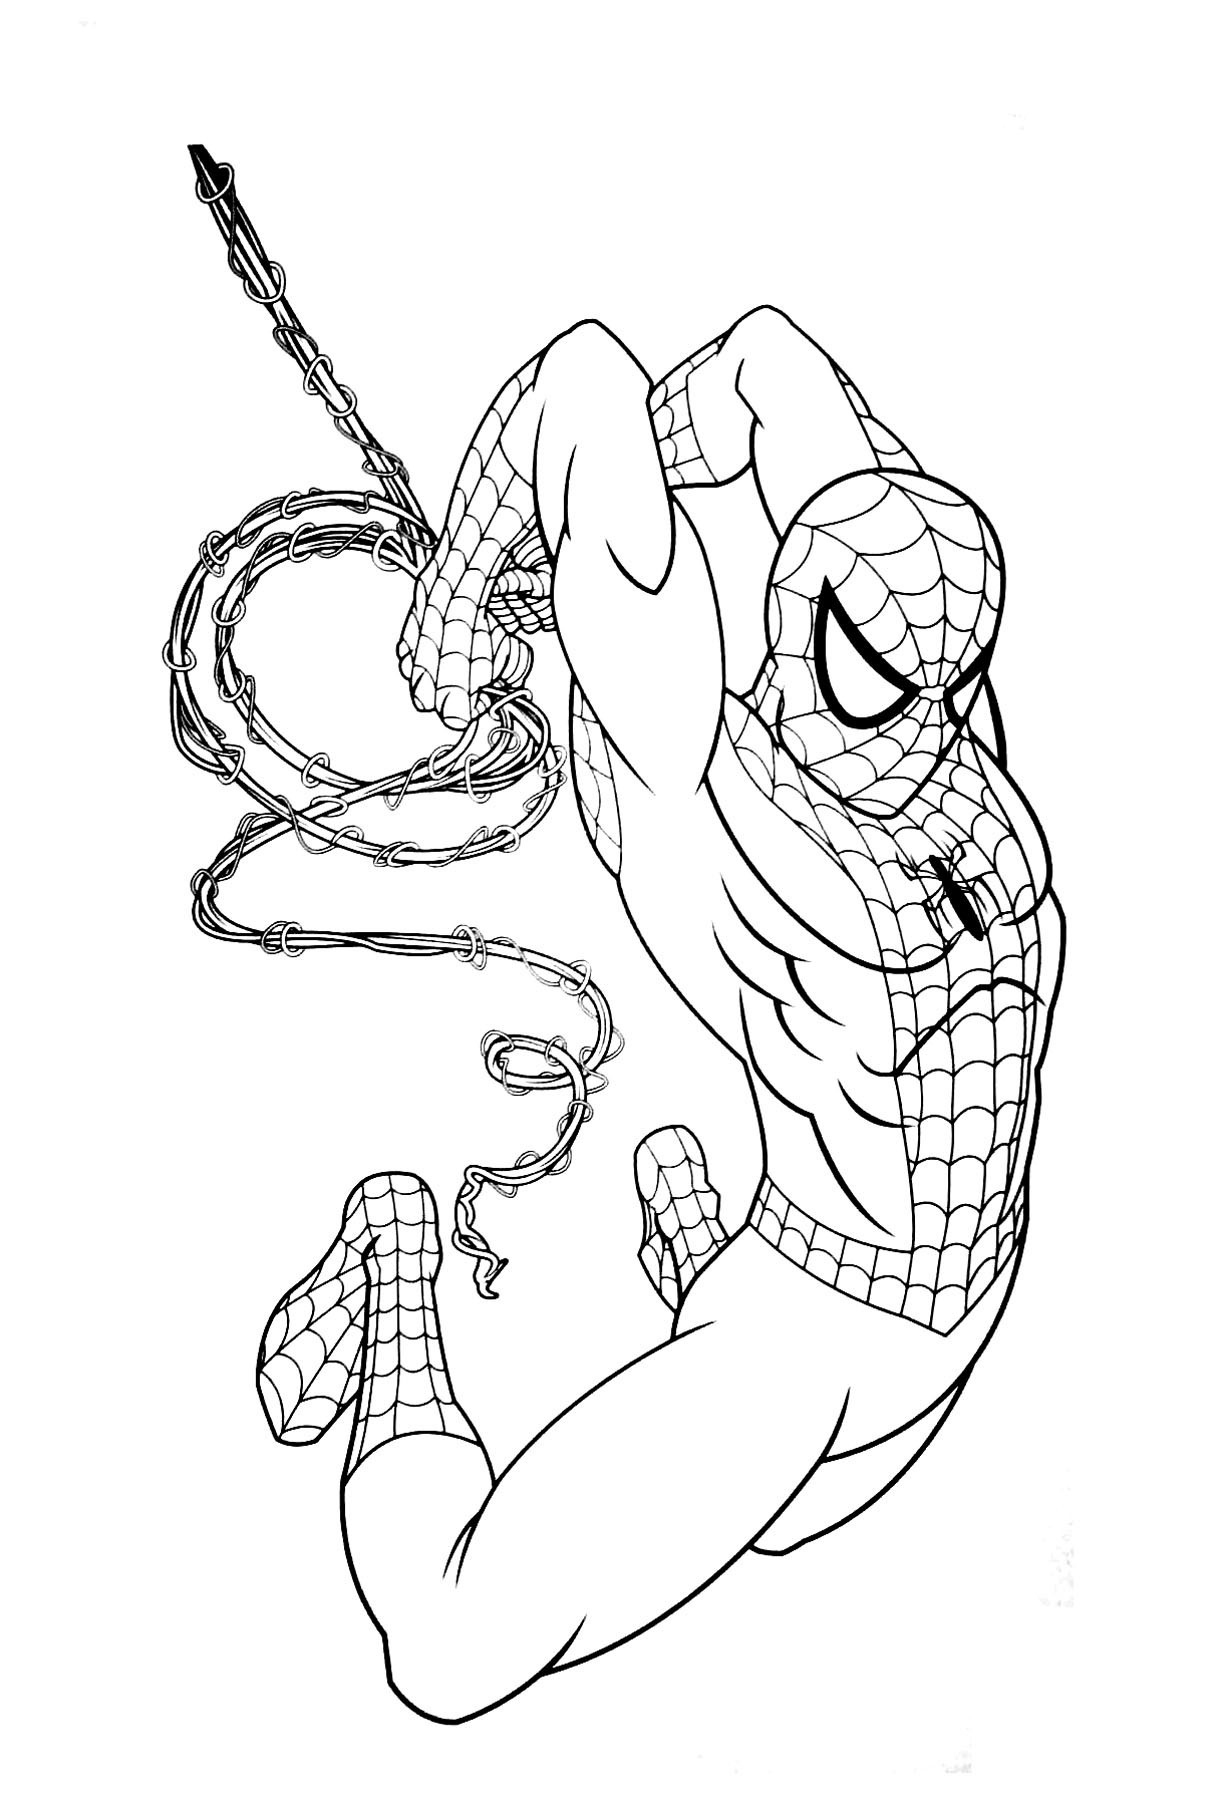 Avengers Endgame Spiderman Coloring Page